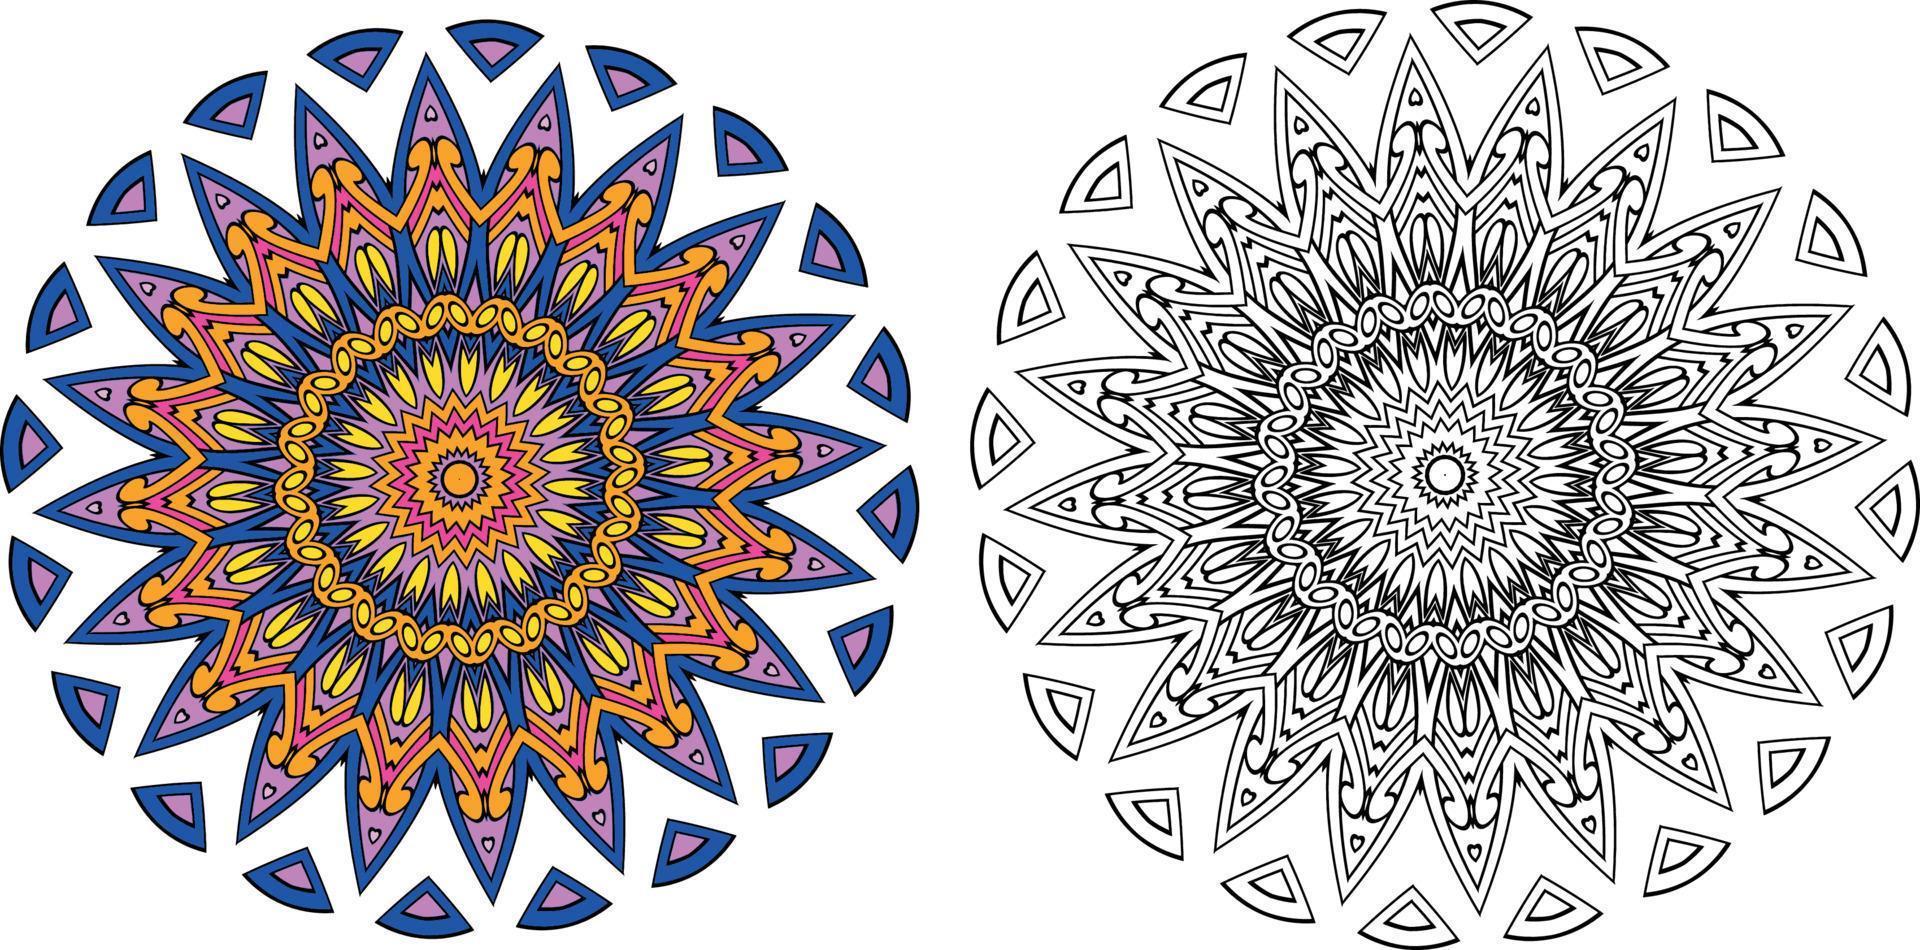 Colorful Mandalas For Coloring Book. Decorative Round Ornaments. Unusual Flower Shape. vector